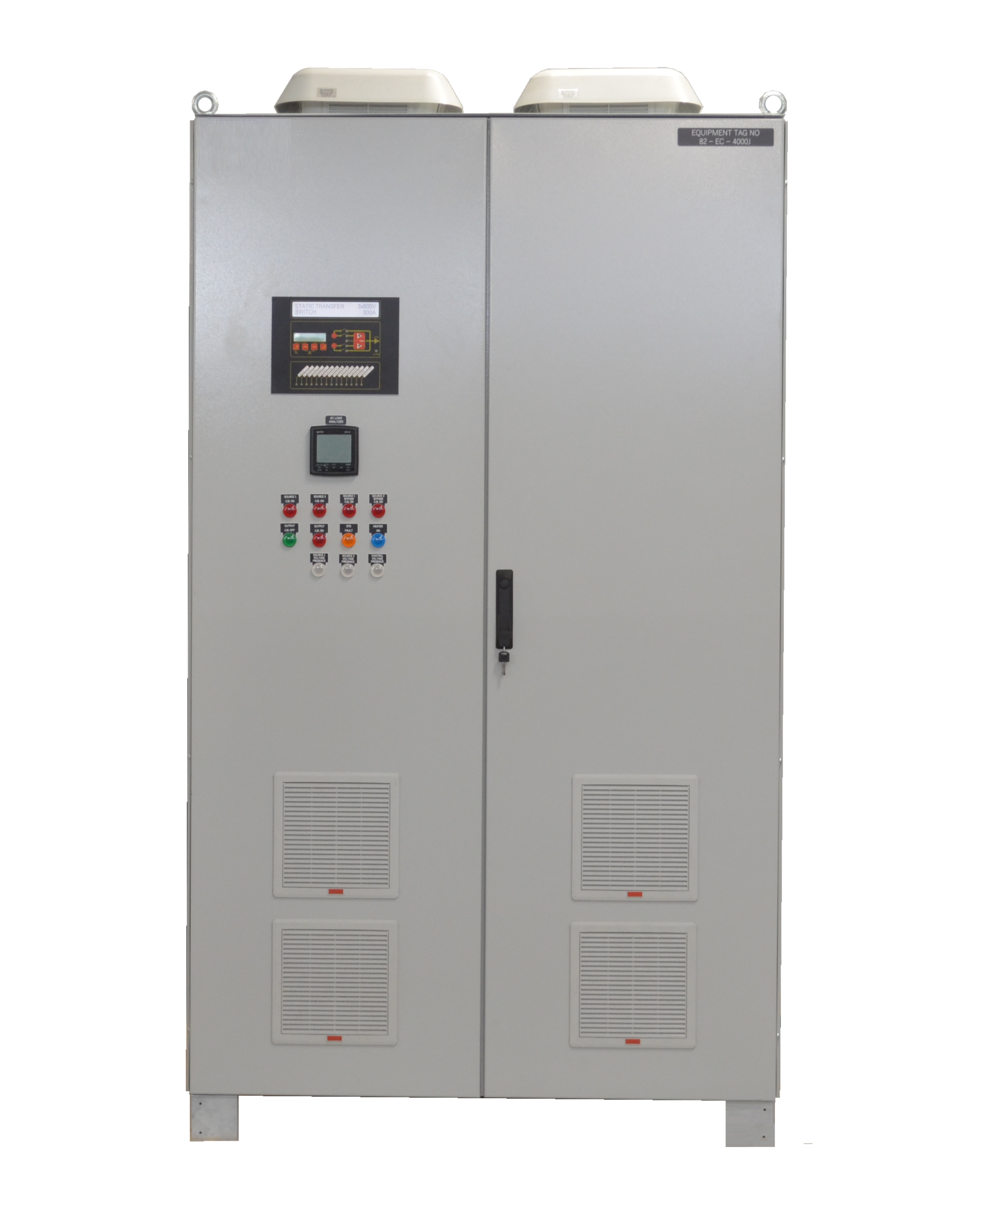 STATIC TRANSFER SWITCH (STS)